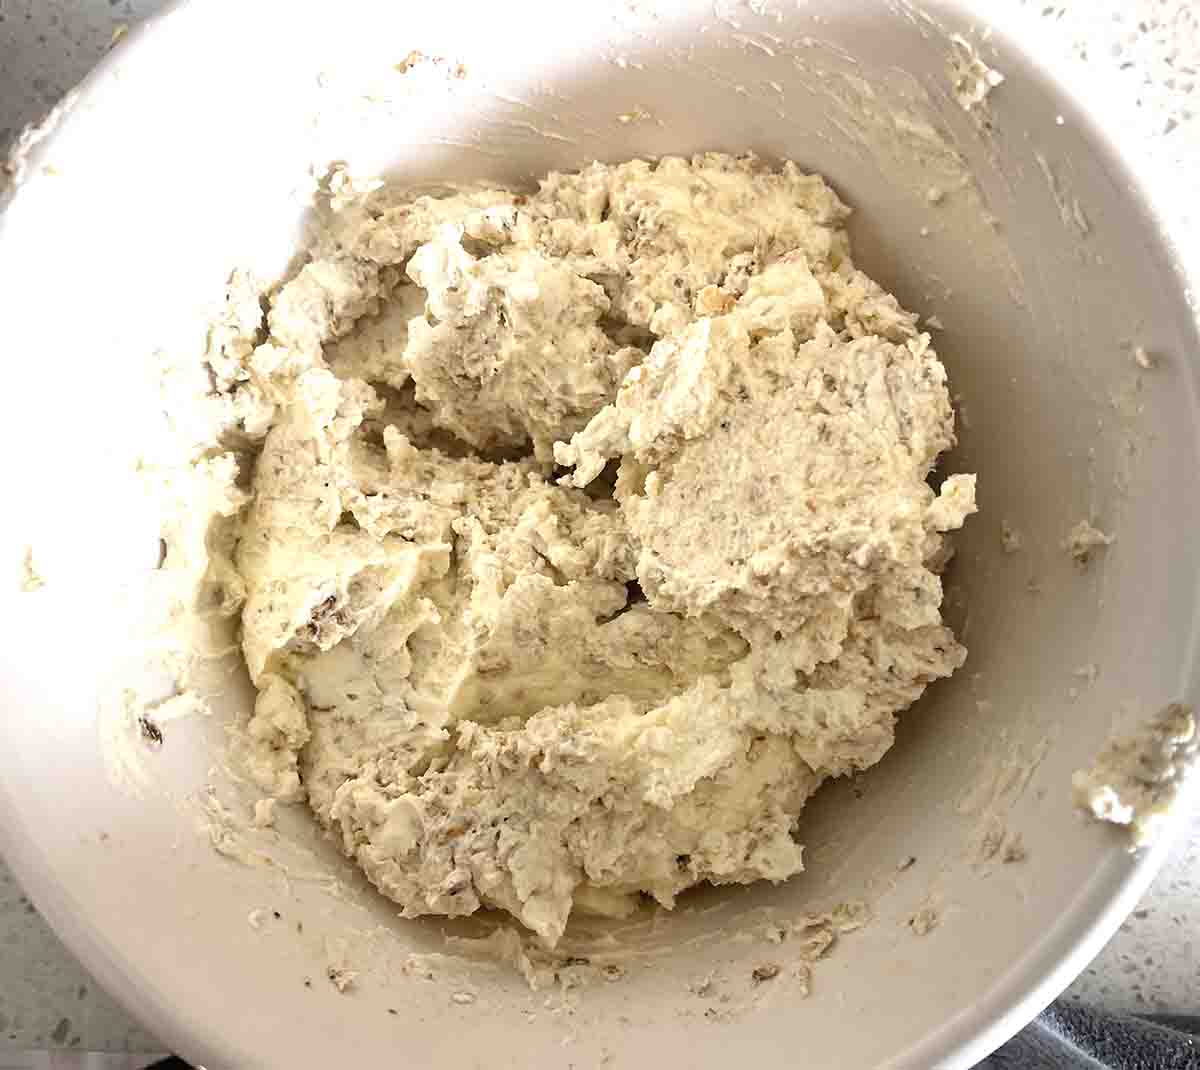 toasted oats added to the cream.